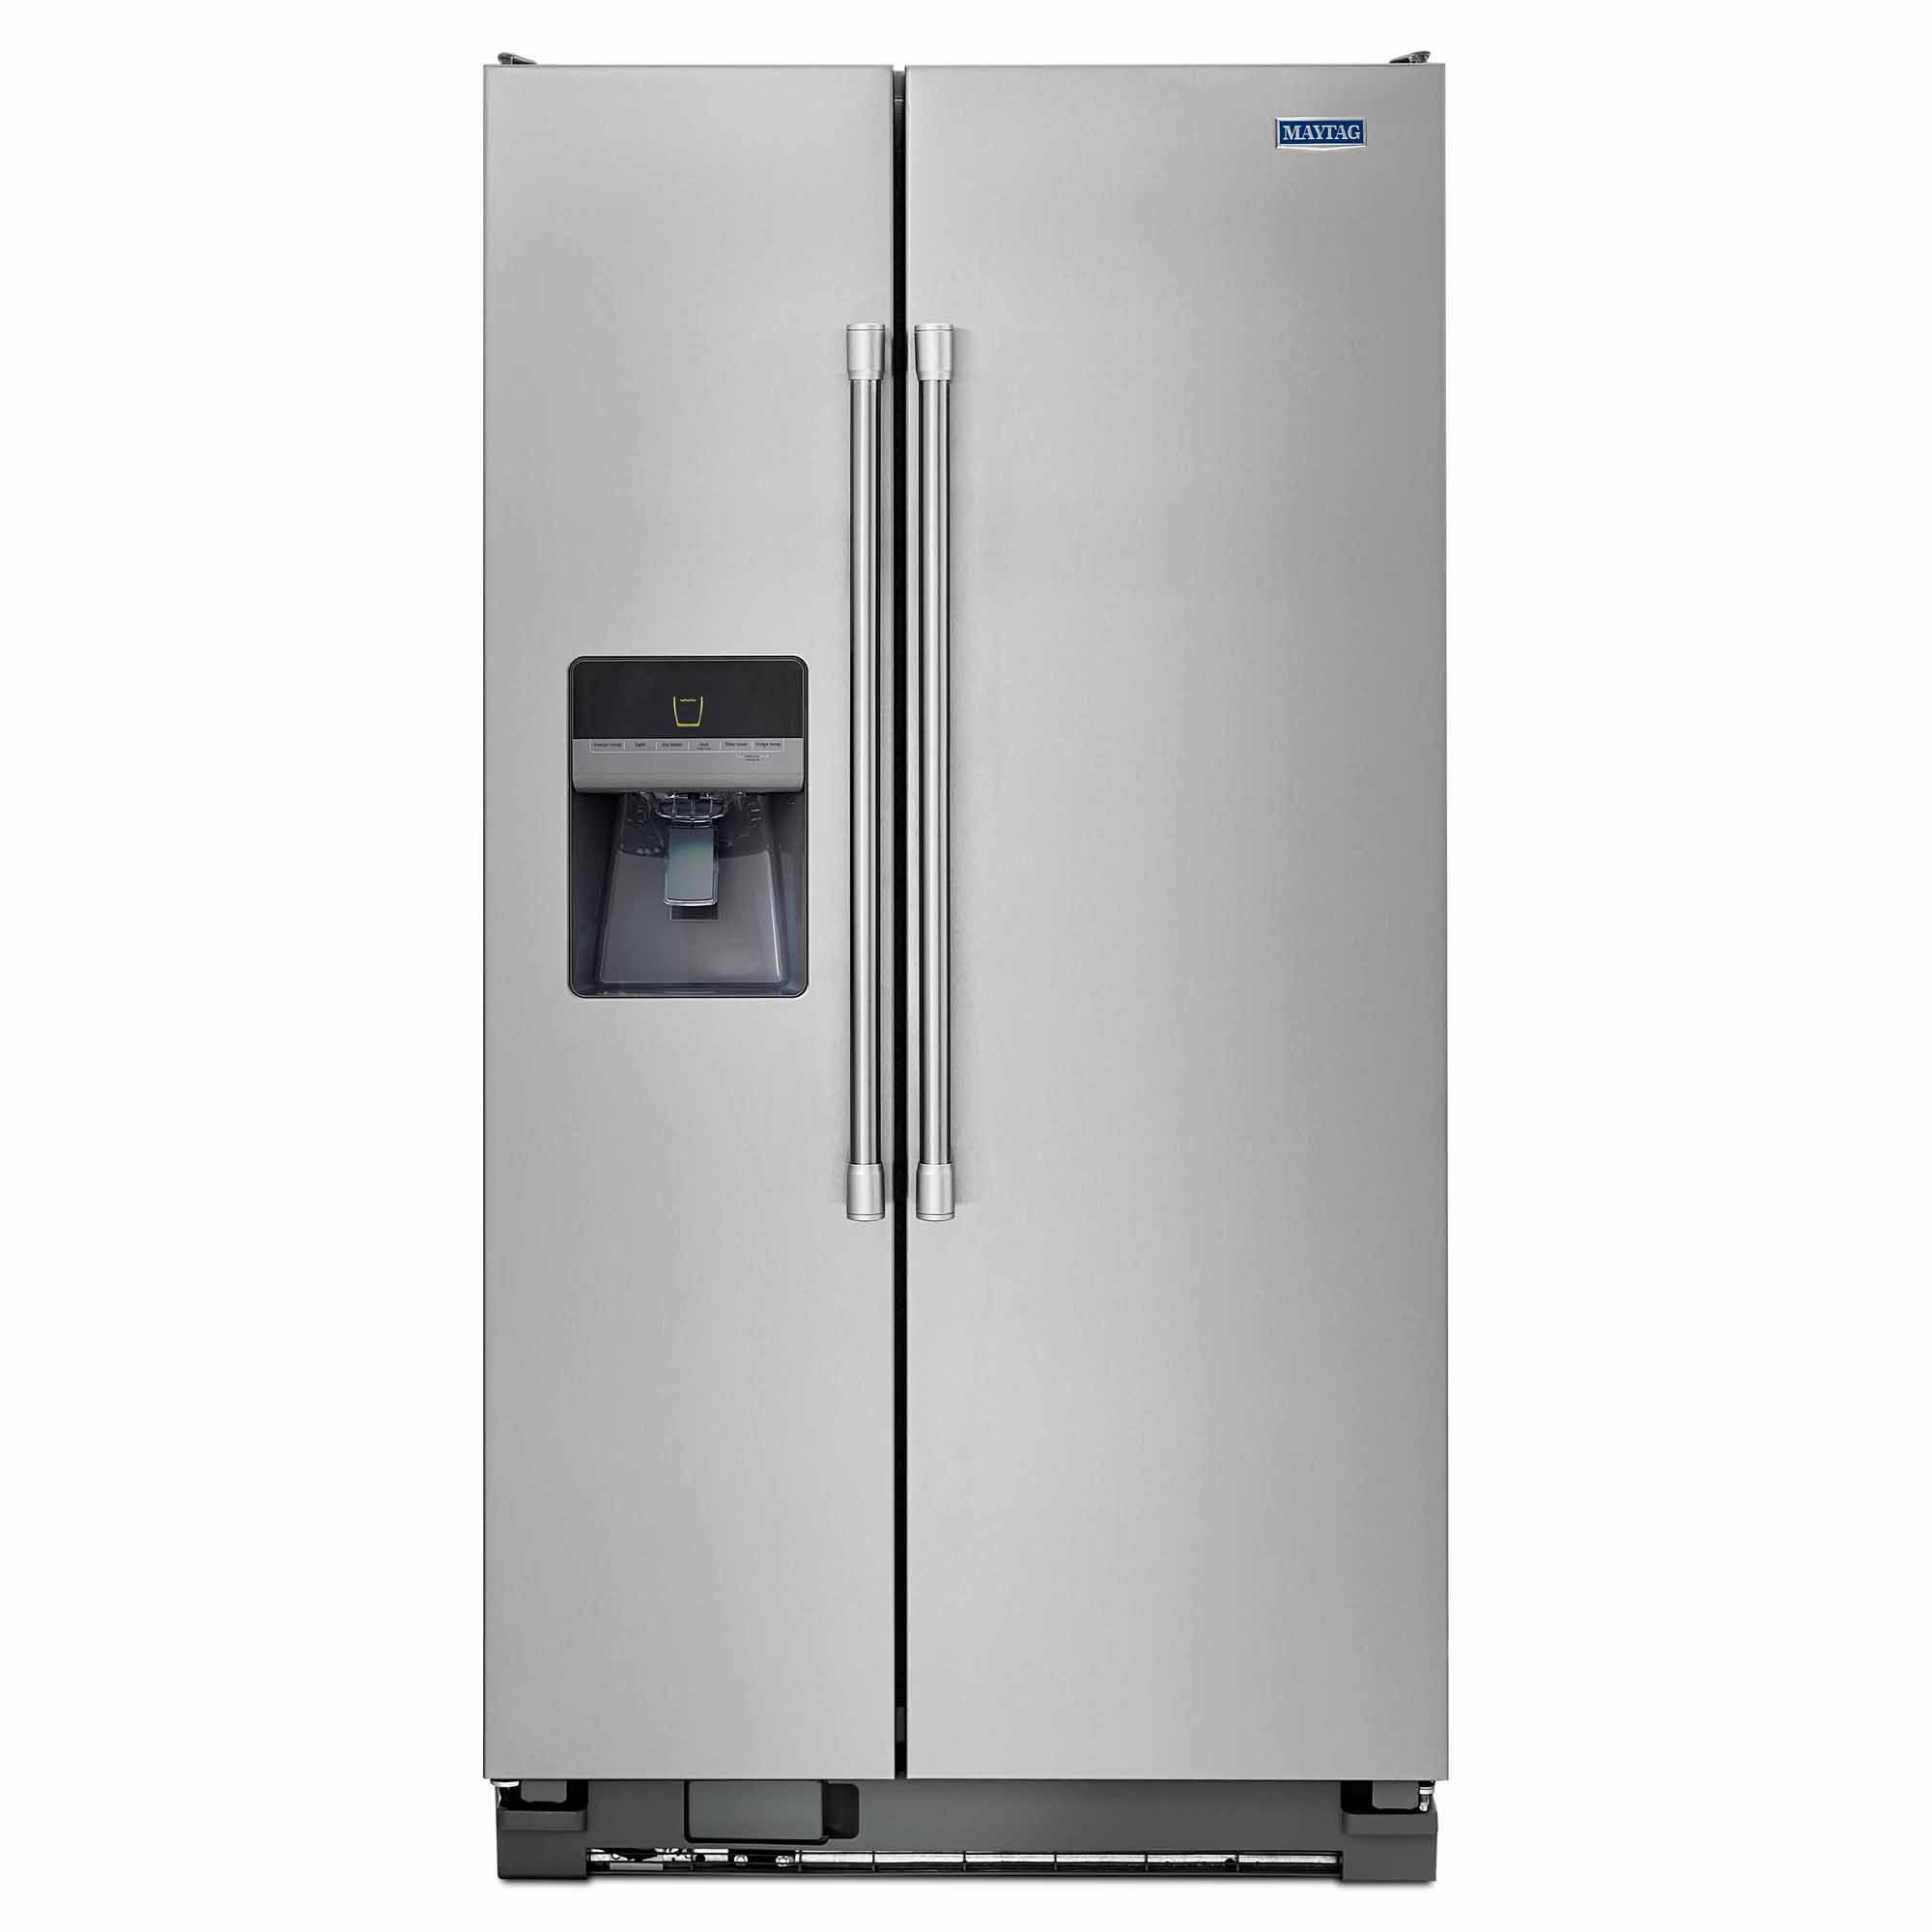 Maytag MSF25D4MDM 24.6 cu. ft. Side-by-Side Refrigerator w/ Ice/Water Maytag Stainless Steel Side By Side Refrigerator